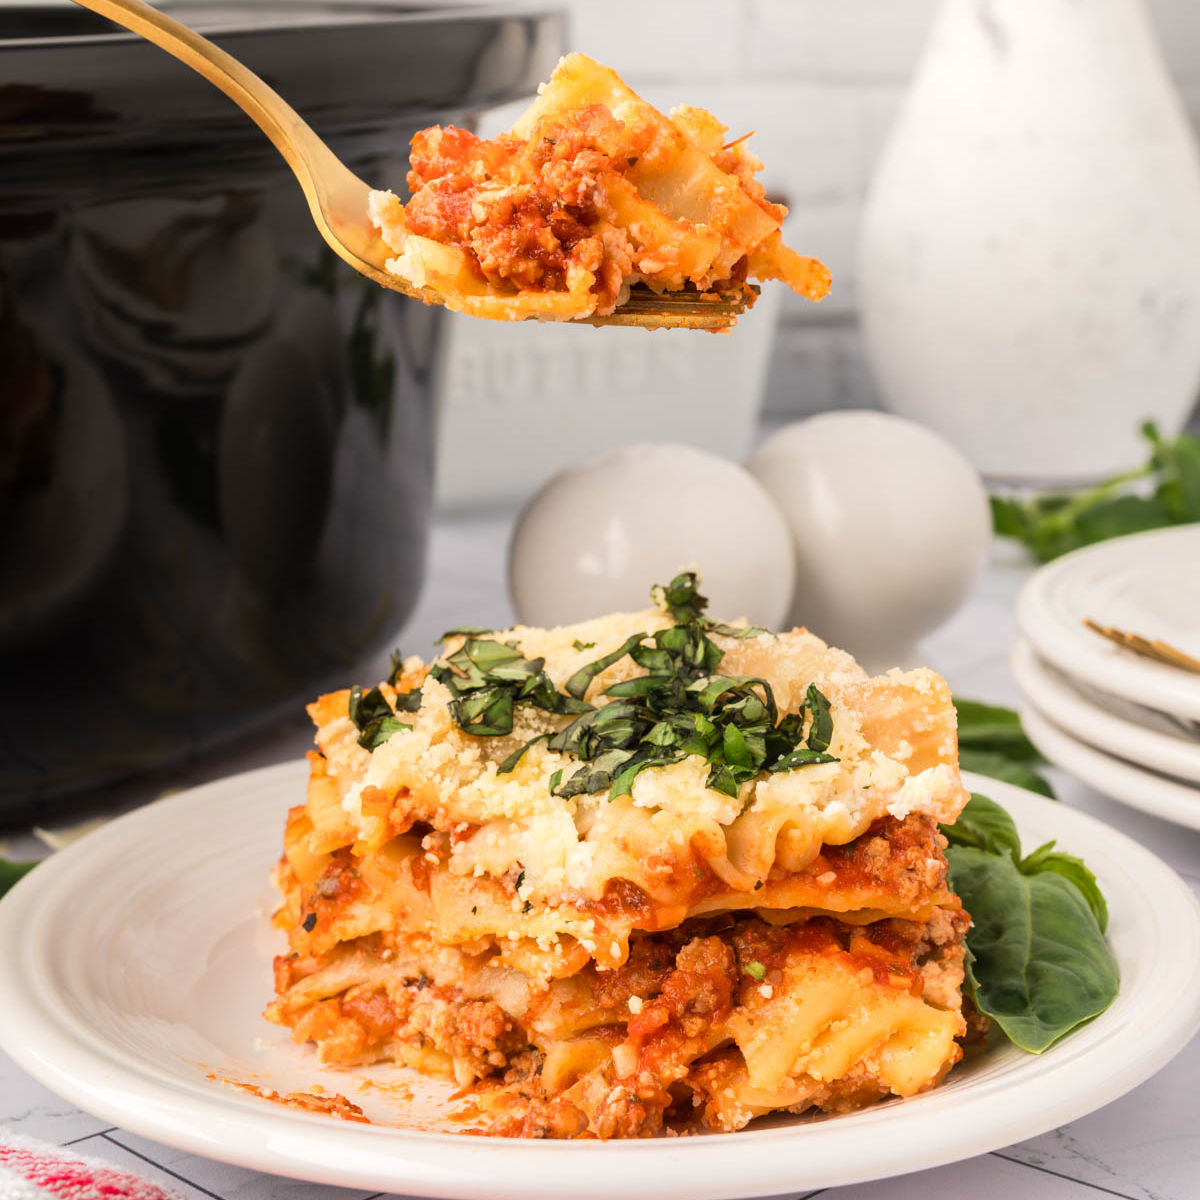 Serving of lasagna on a white plate with a bite on a fork